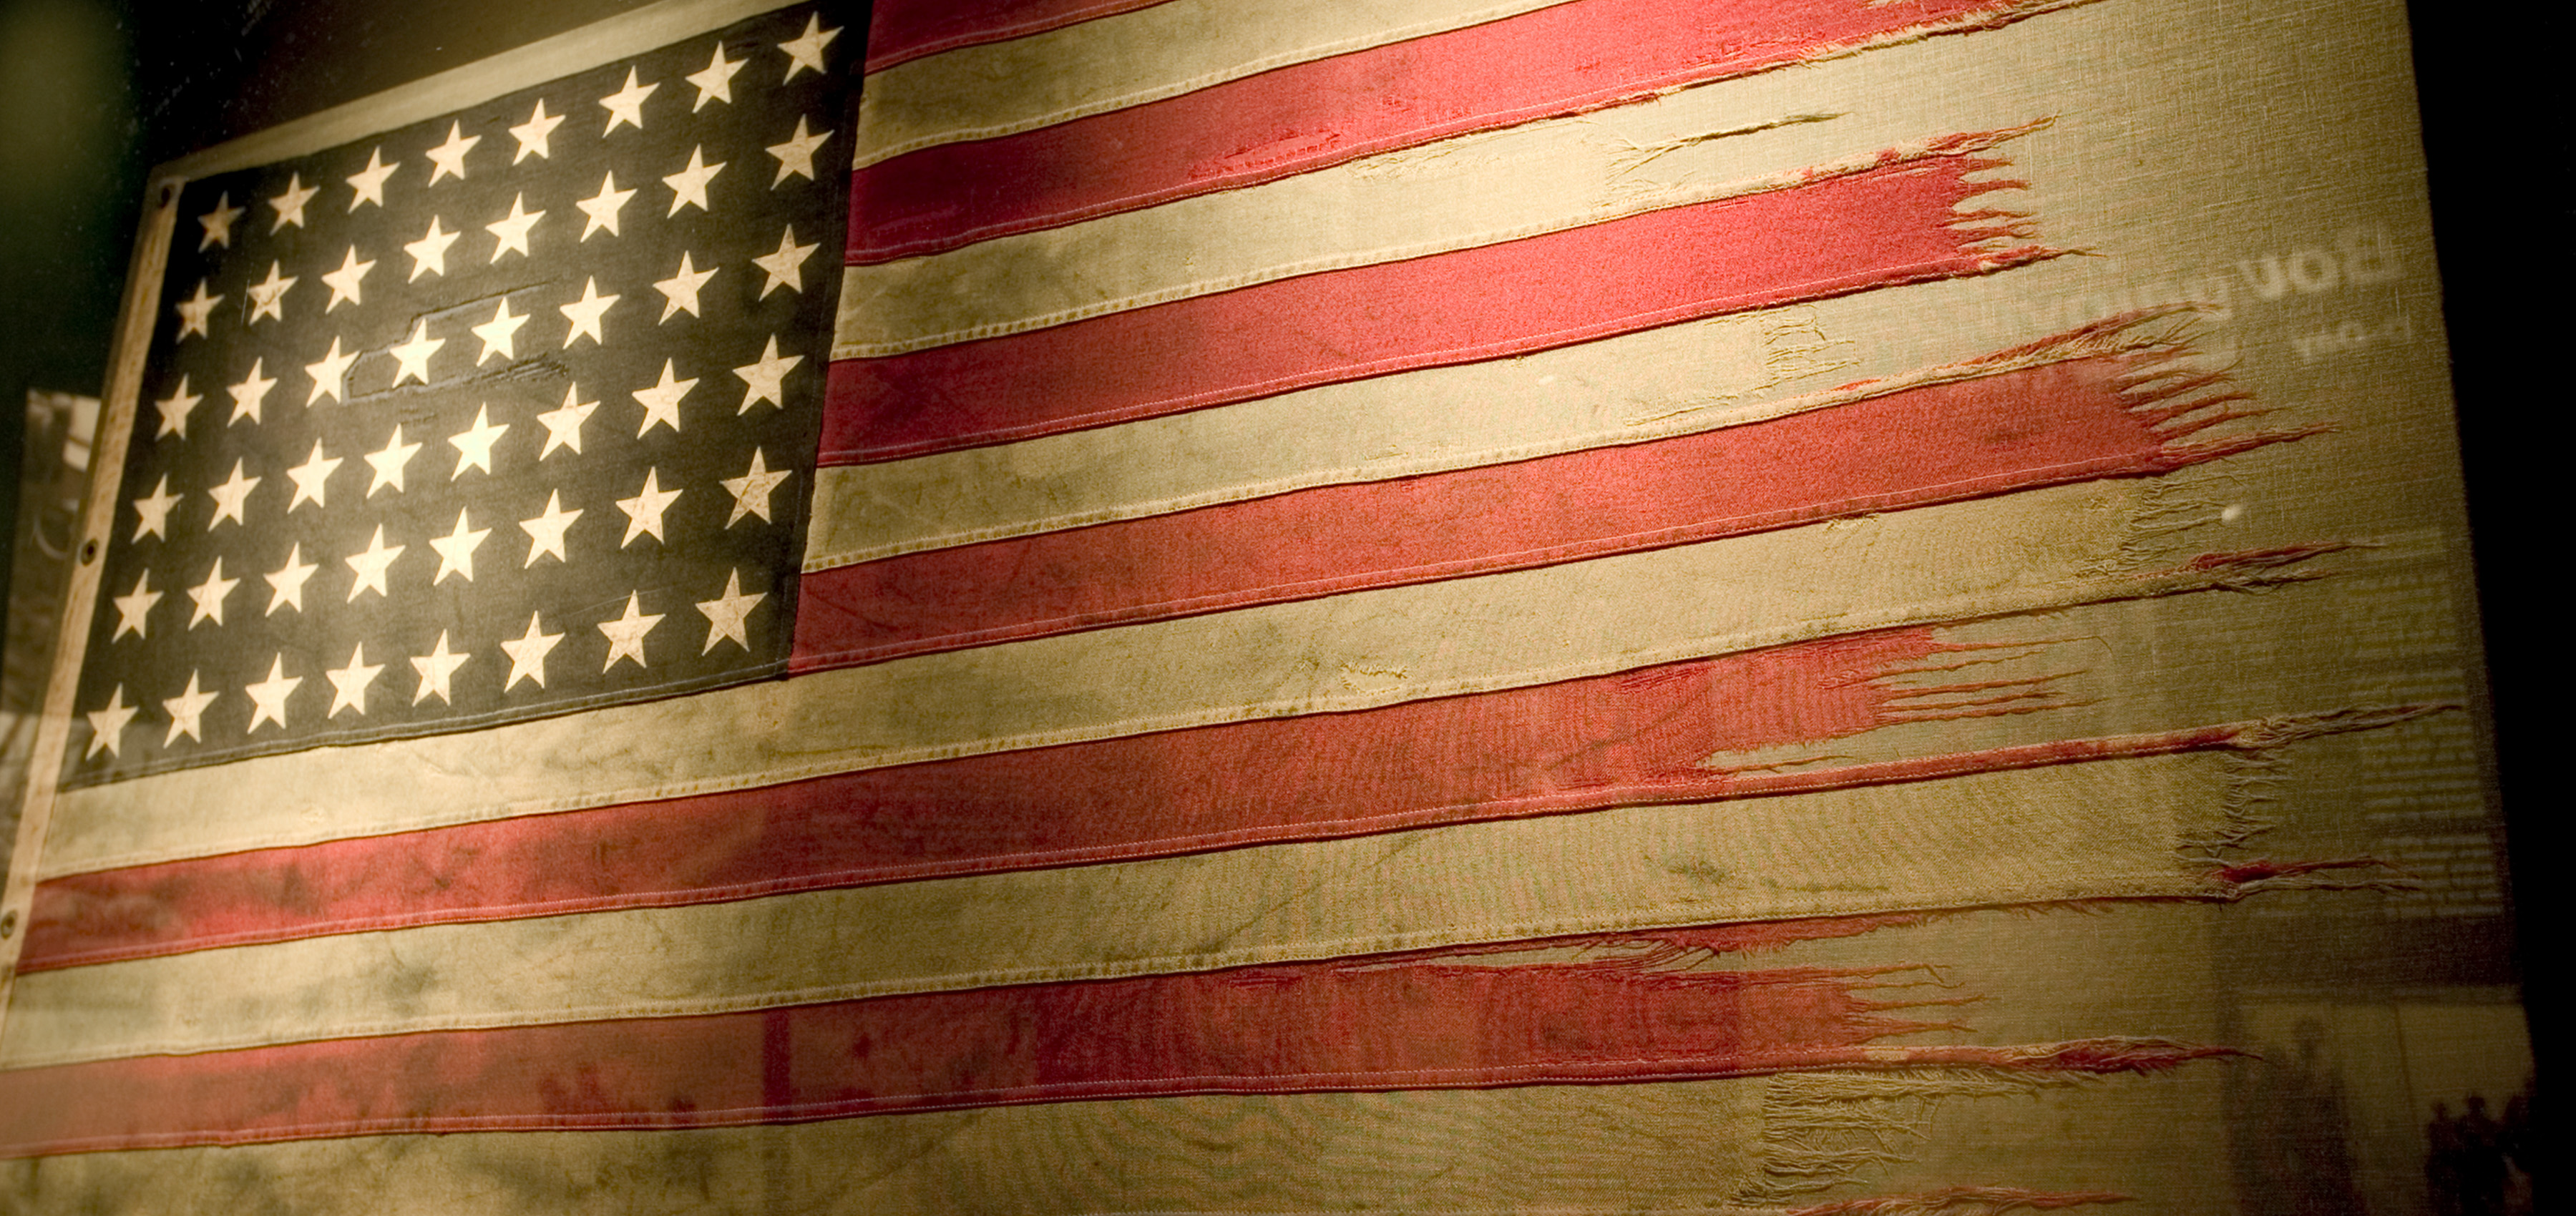 D-Day Invasion of Normandy gallery, American flag